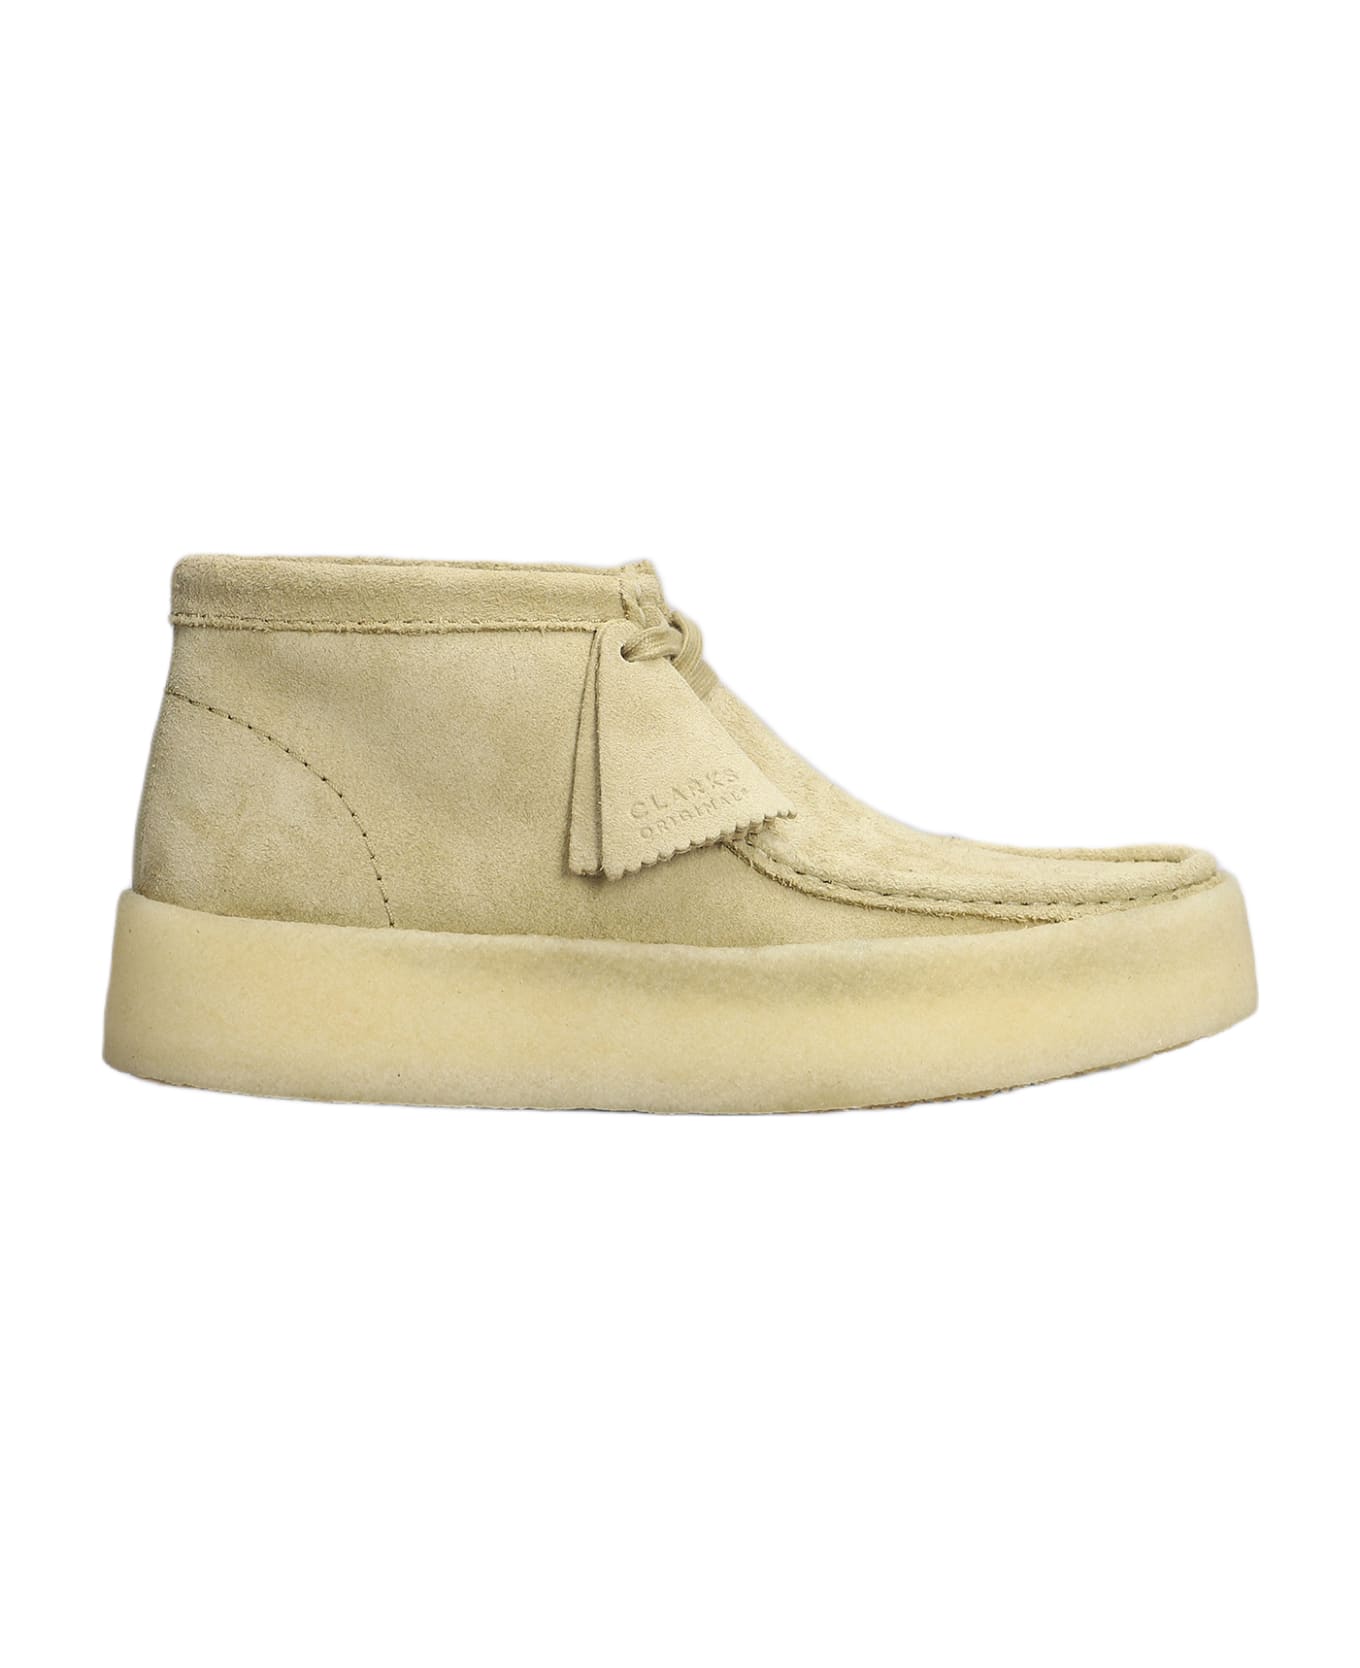 Clarks Wallabee Cup Lace Up Shoes In Beige Suede - beige